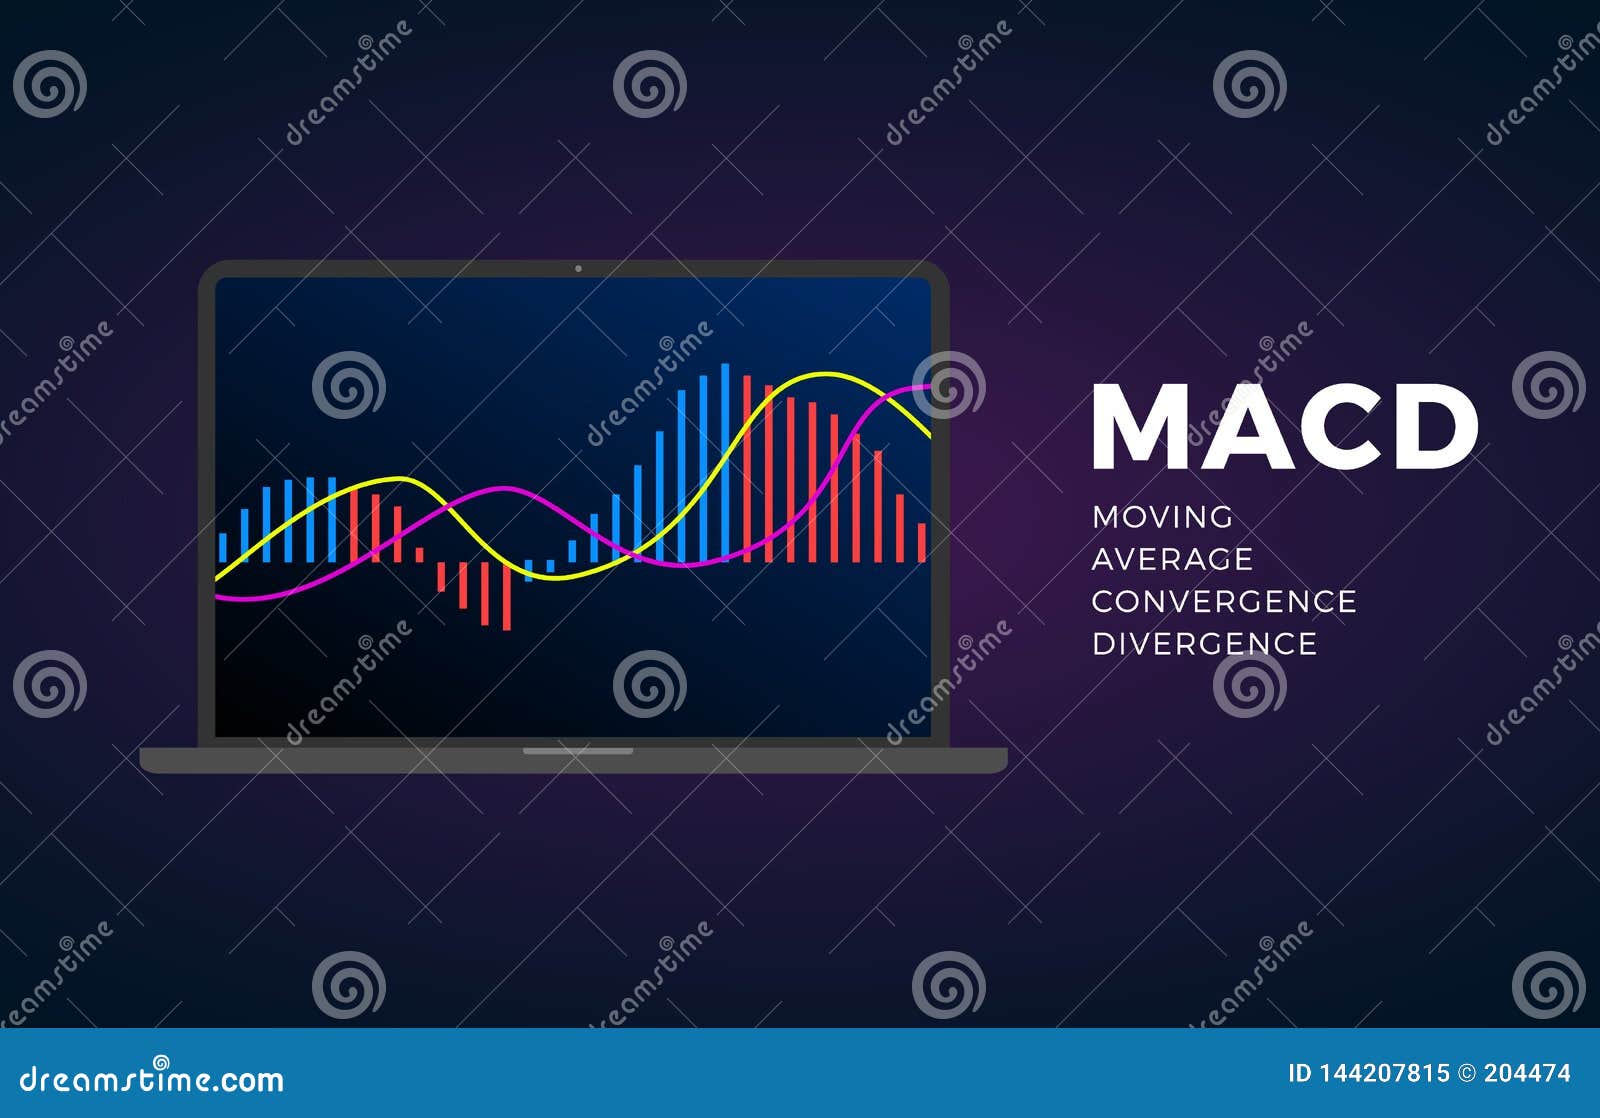 MACD Indicator Technical Analysis. Vector Stock And ...